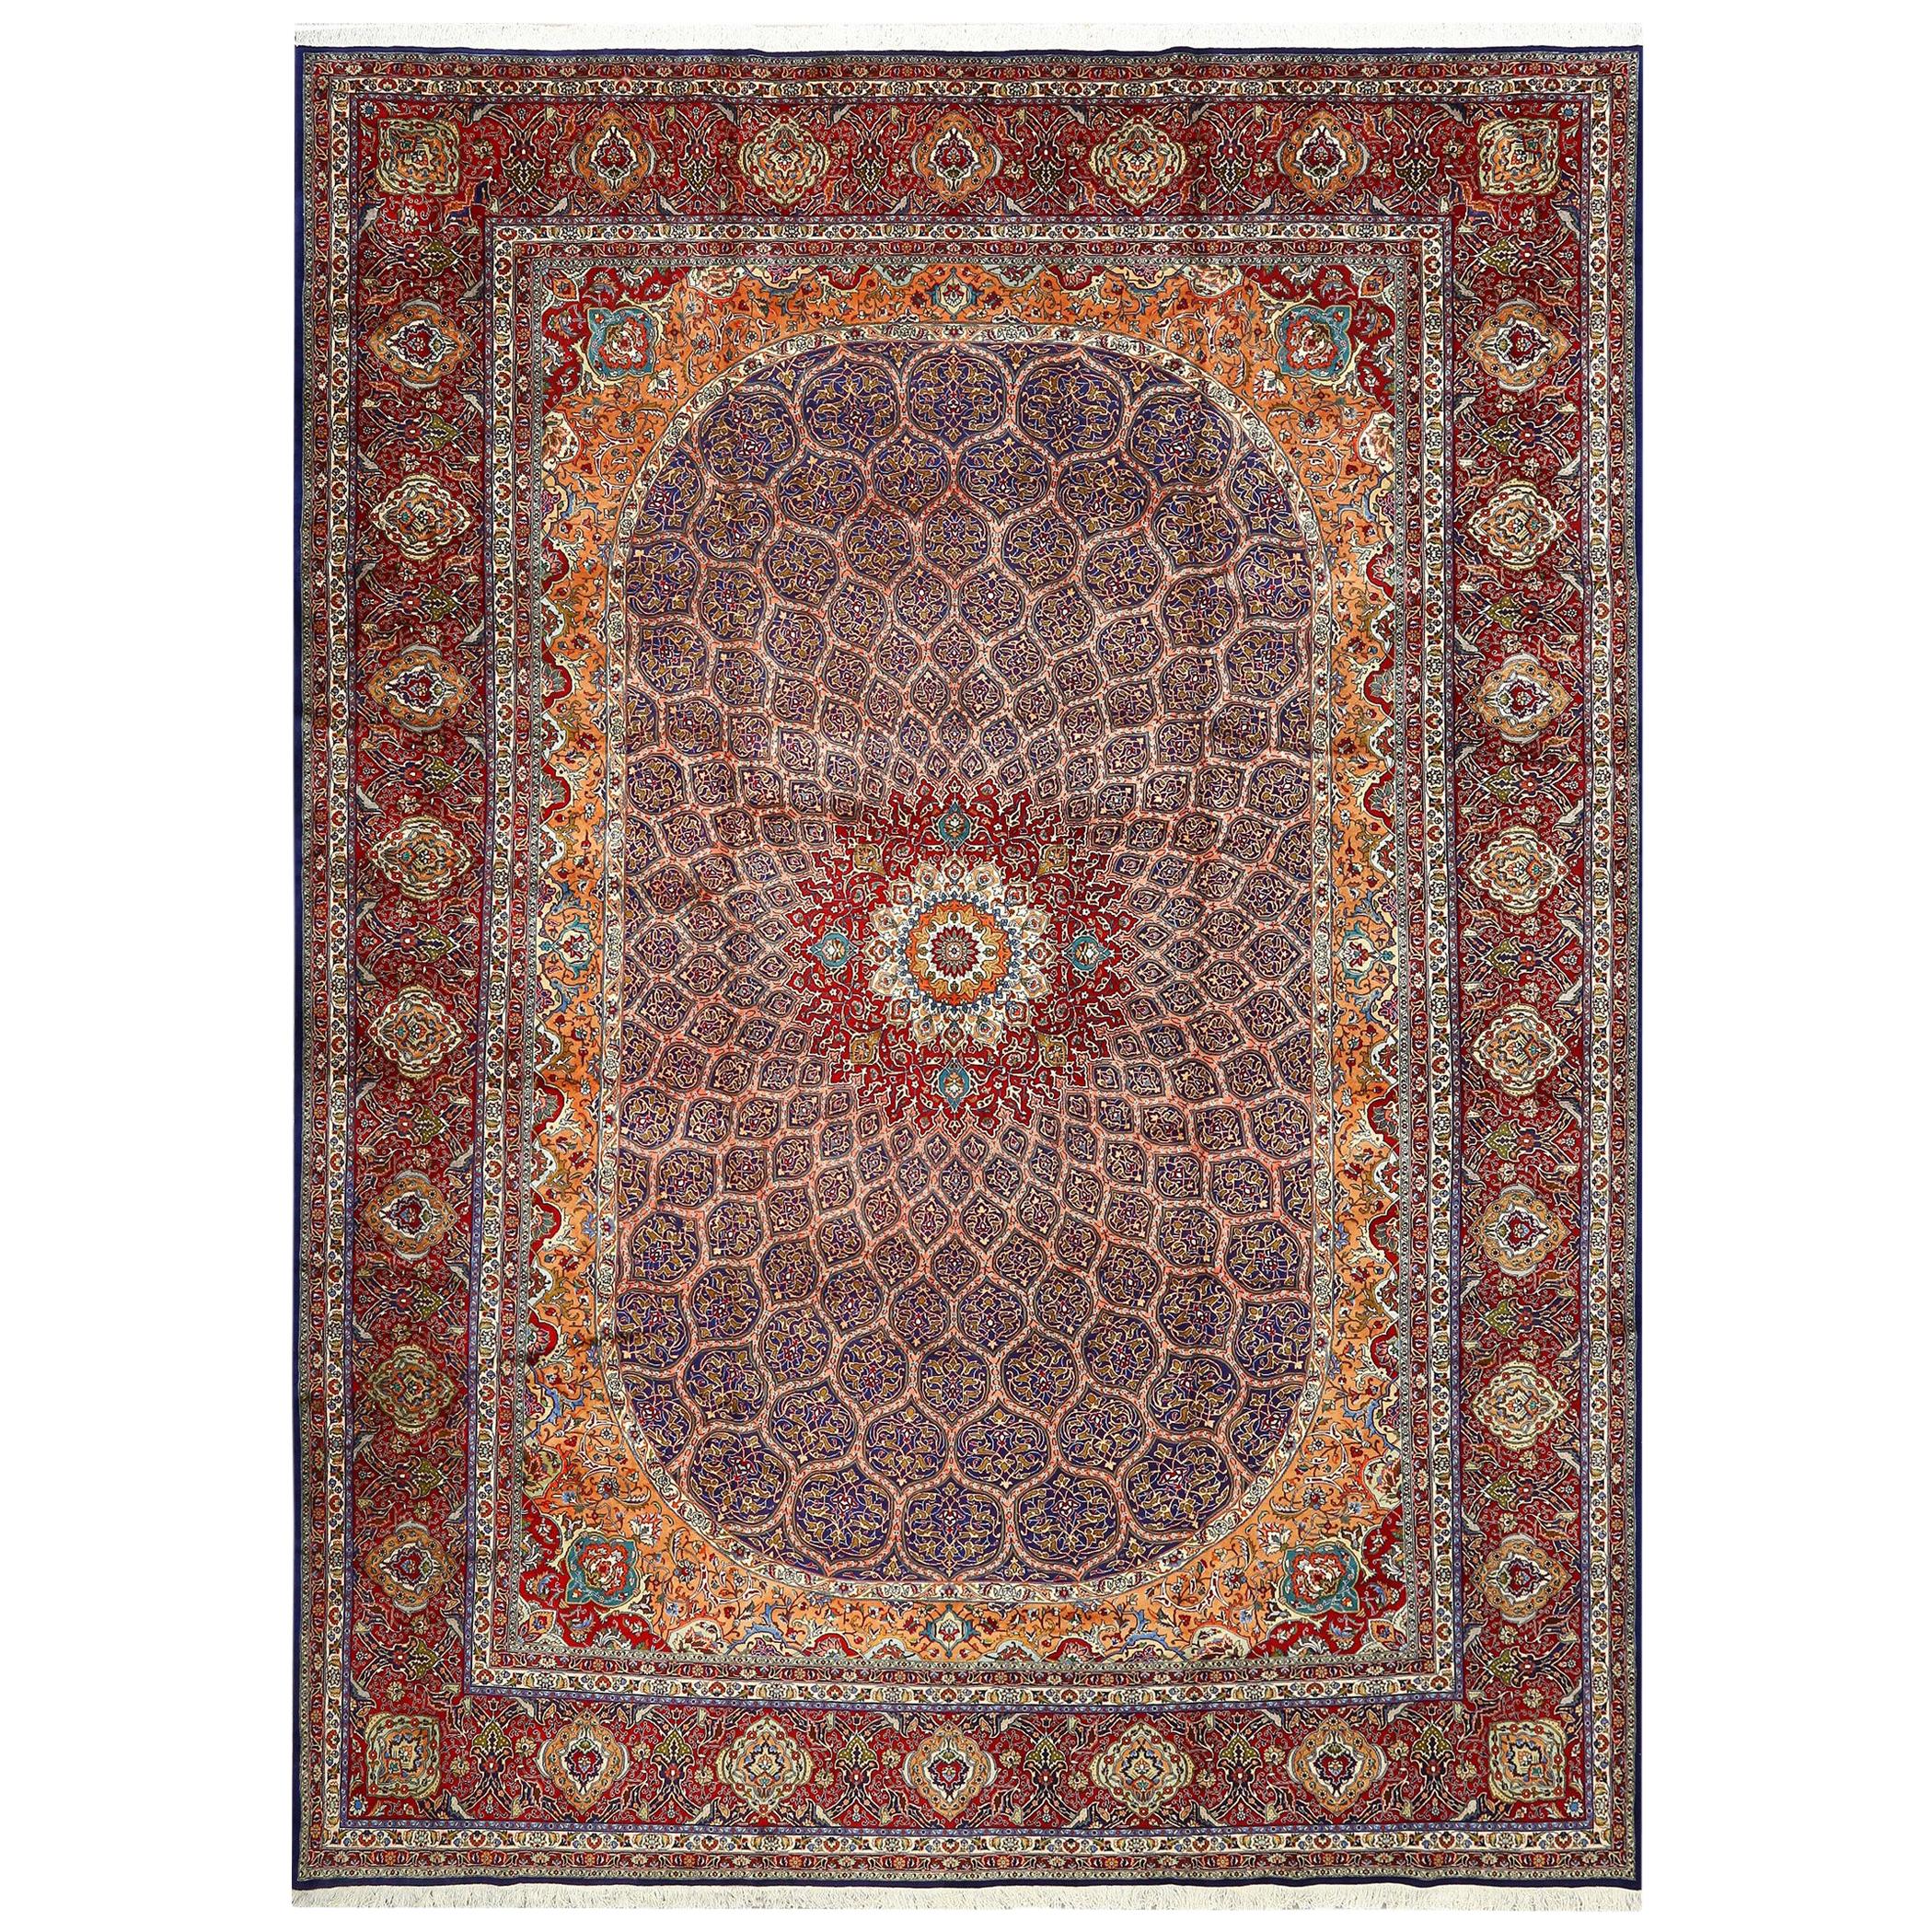 Nazmiyal Collection Vintage Tabriz Persian Rug. Size: 11 ft 11 in x 16 ft 3 in 